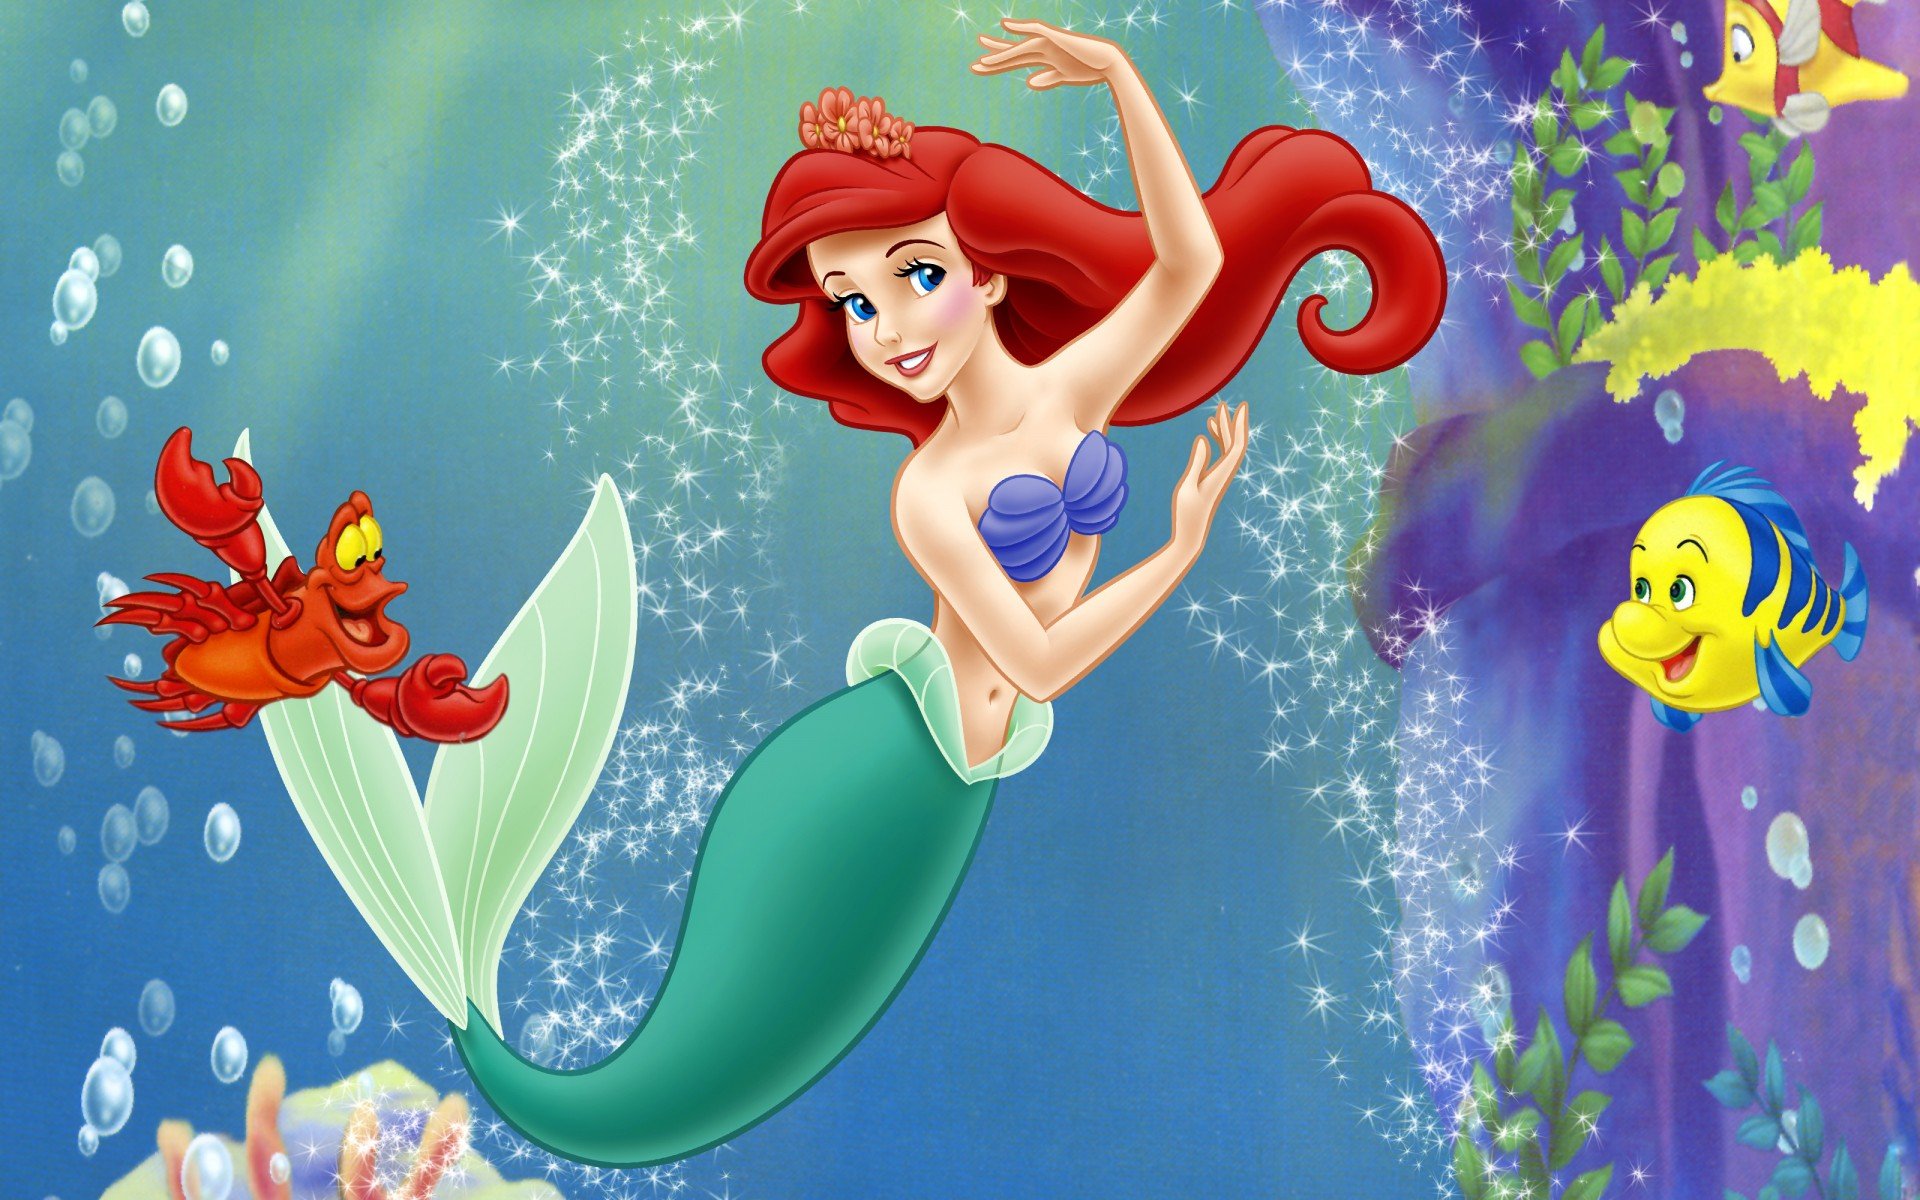 Little Mermaid Images Free Download